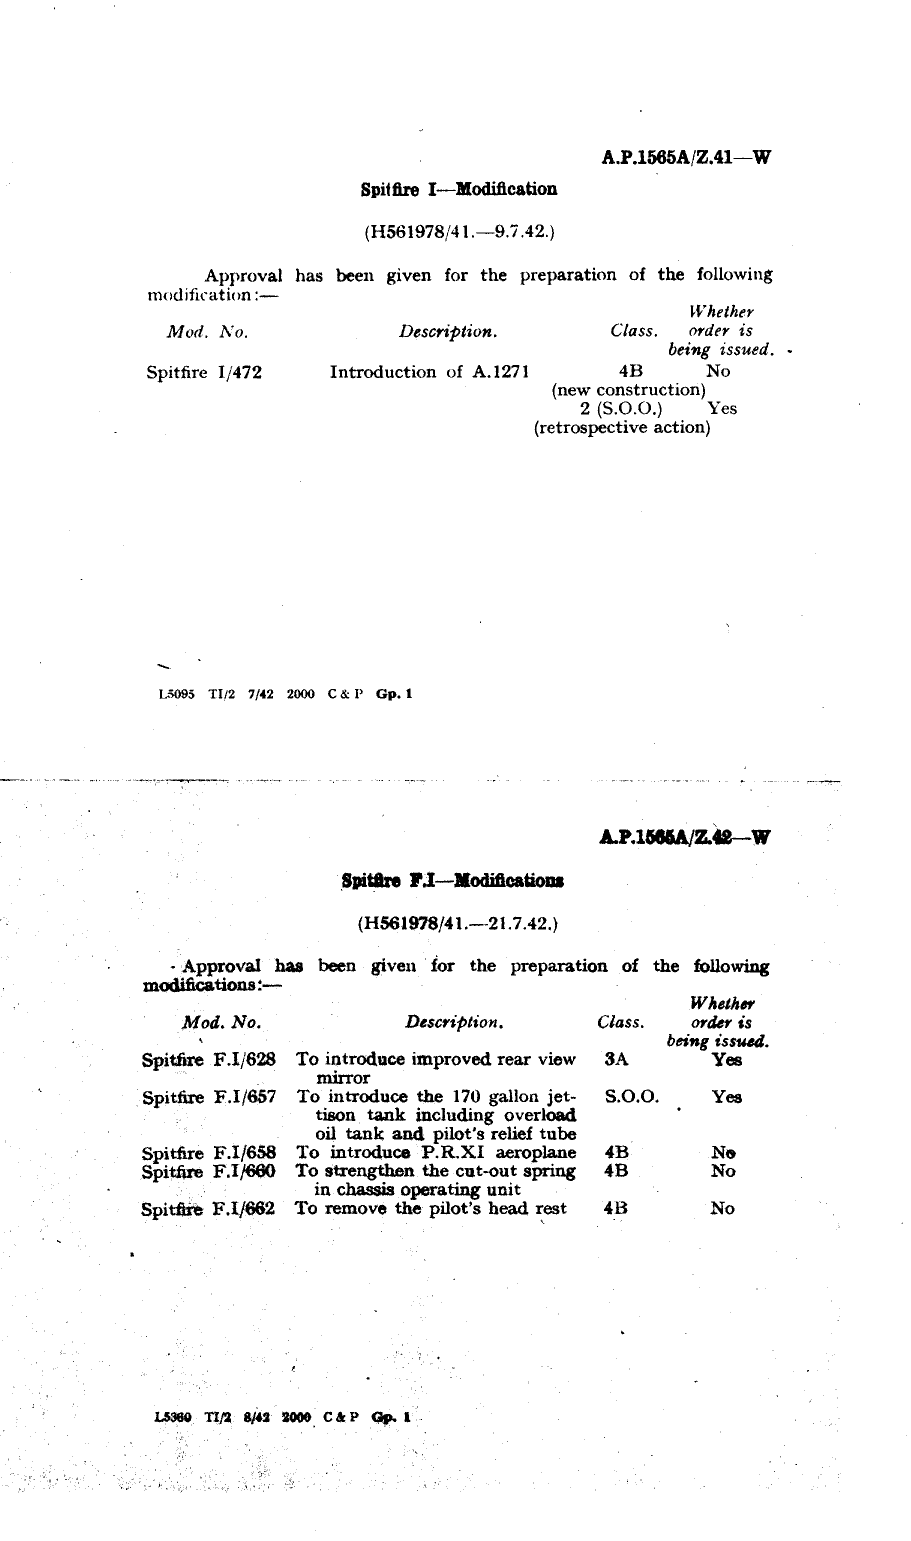 Sample page 1 from AirCorps Library document: Spitfire I Modifications 472